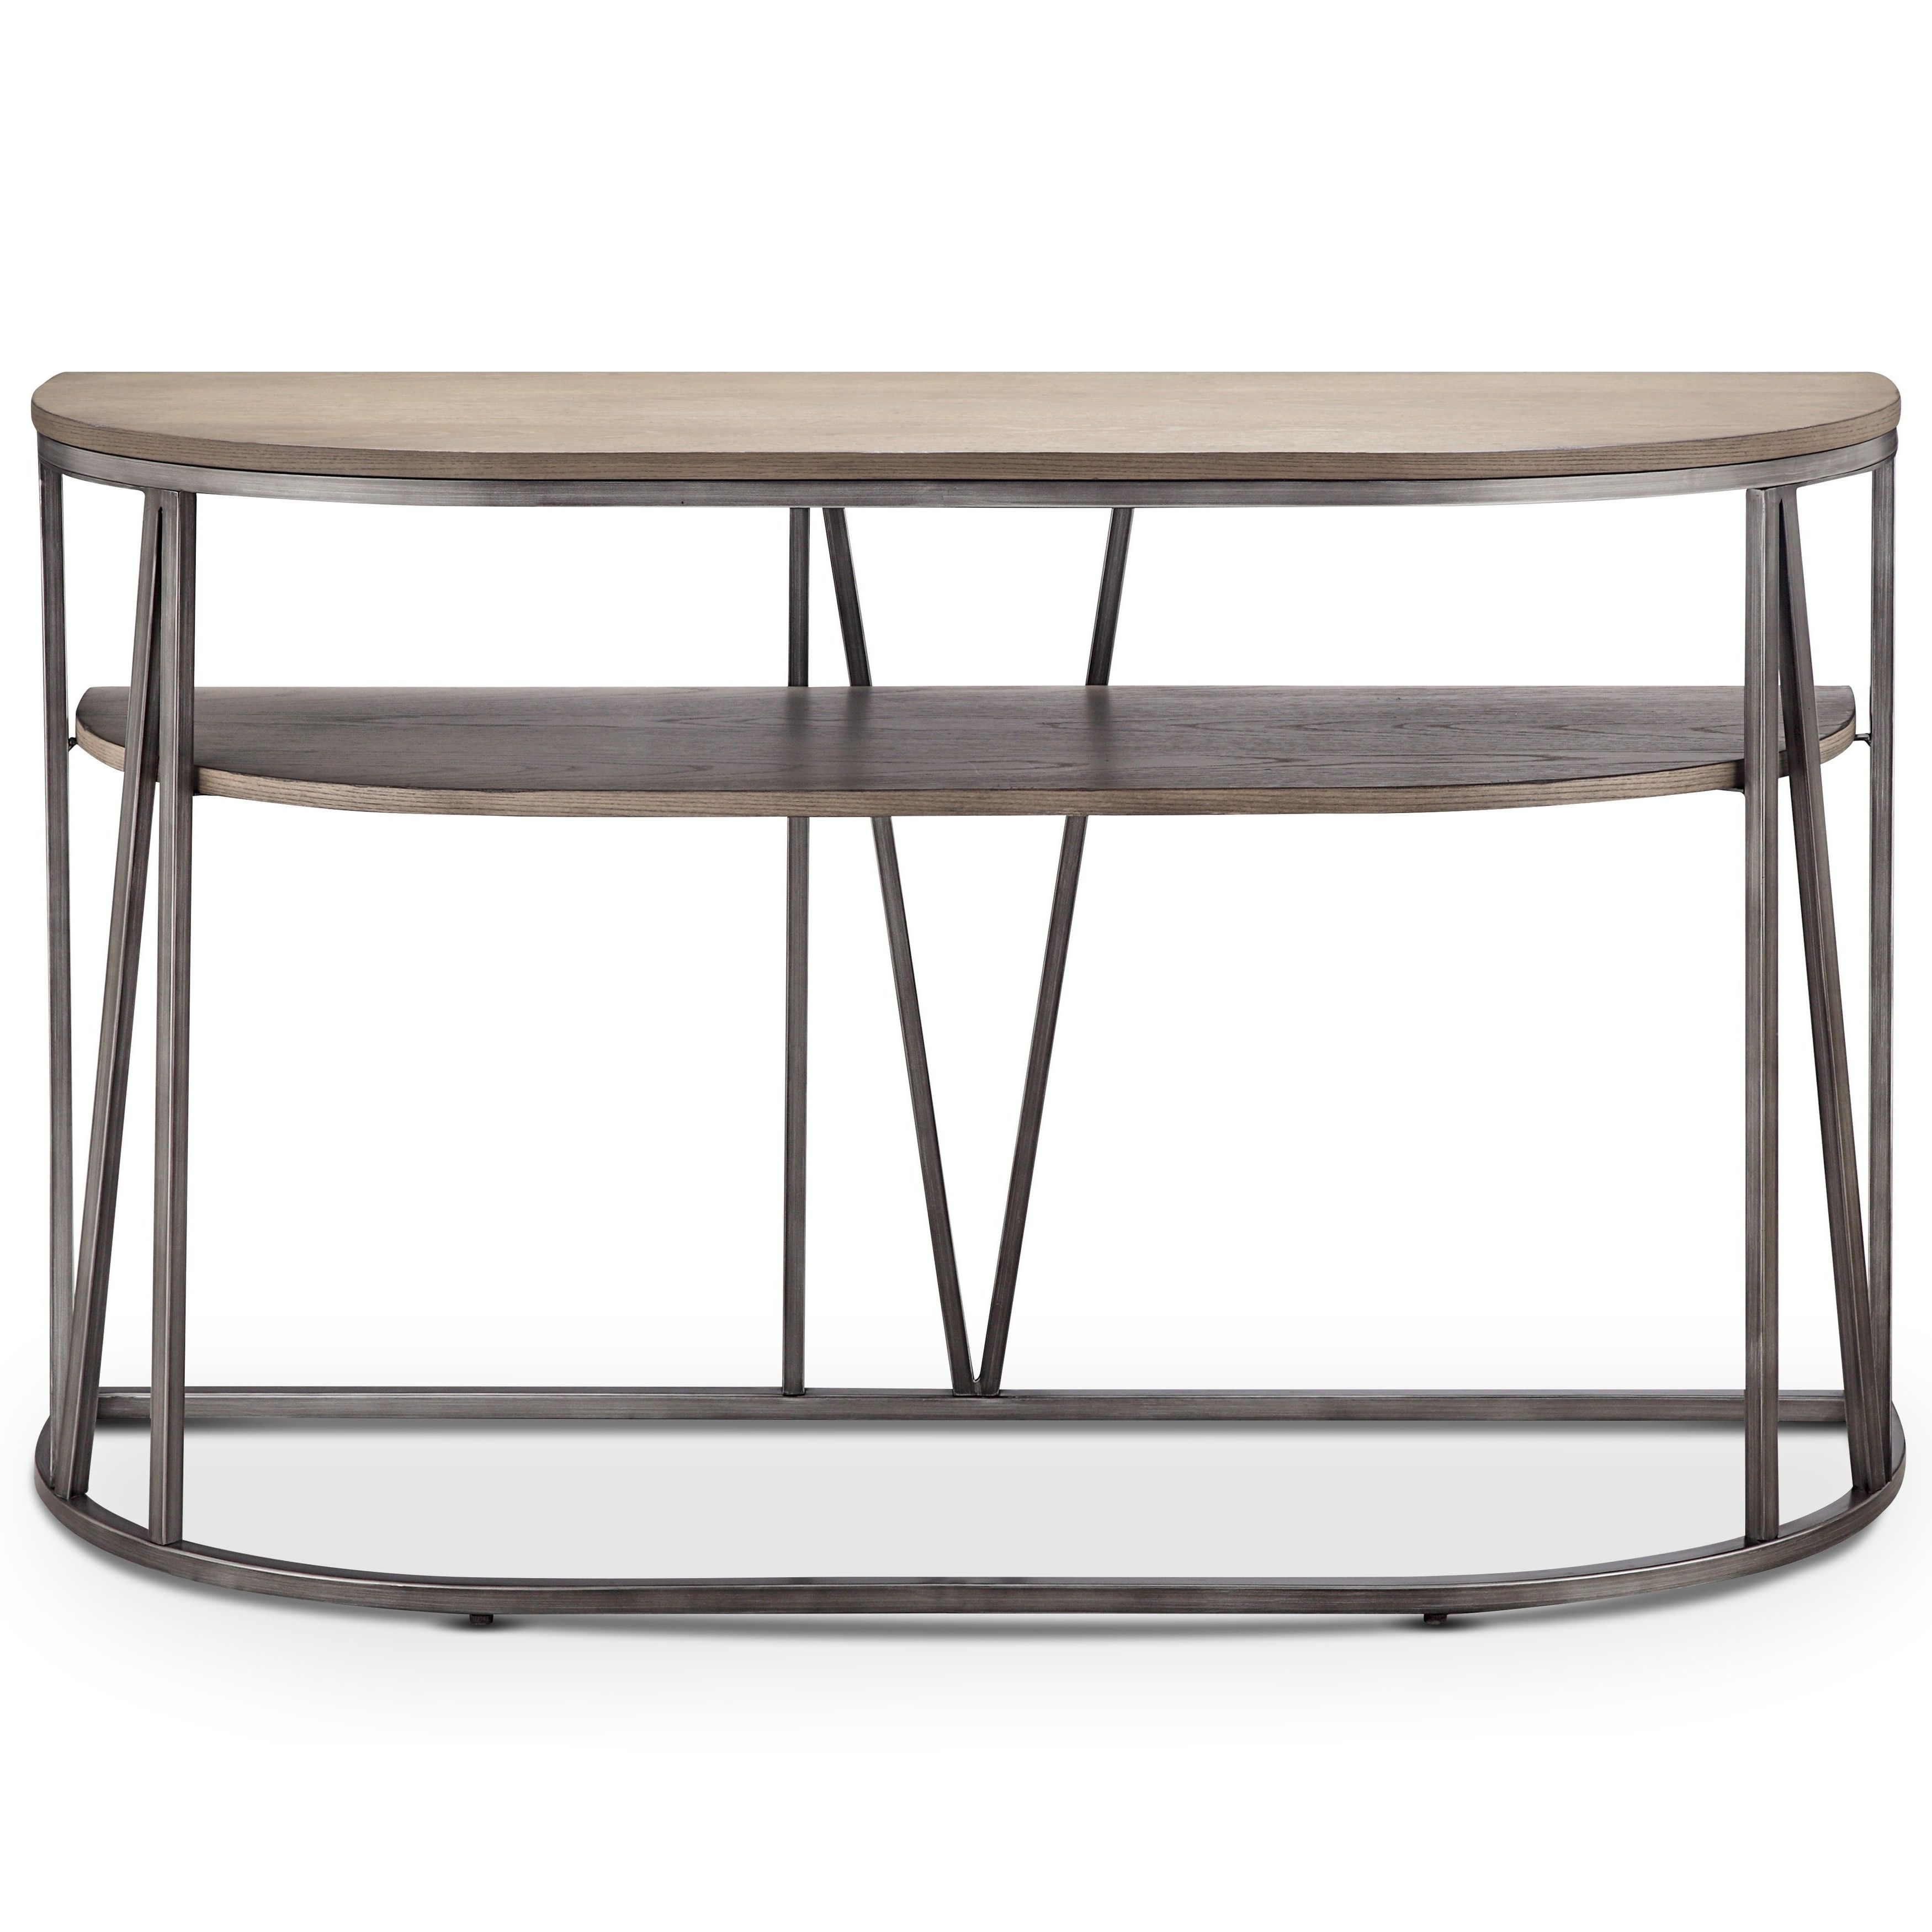 Yukon Grey Console Tables Inside Fashionable Magnussen Home Furnishings Avalon Modern Weathered White Oak (View 11 of 20)